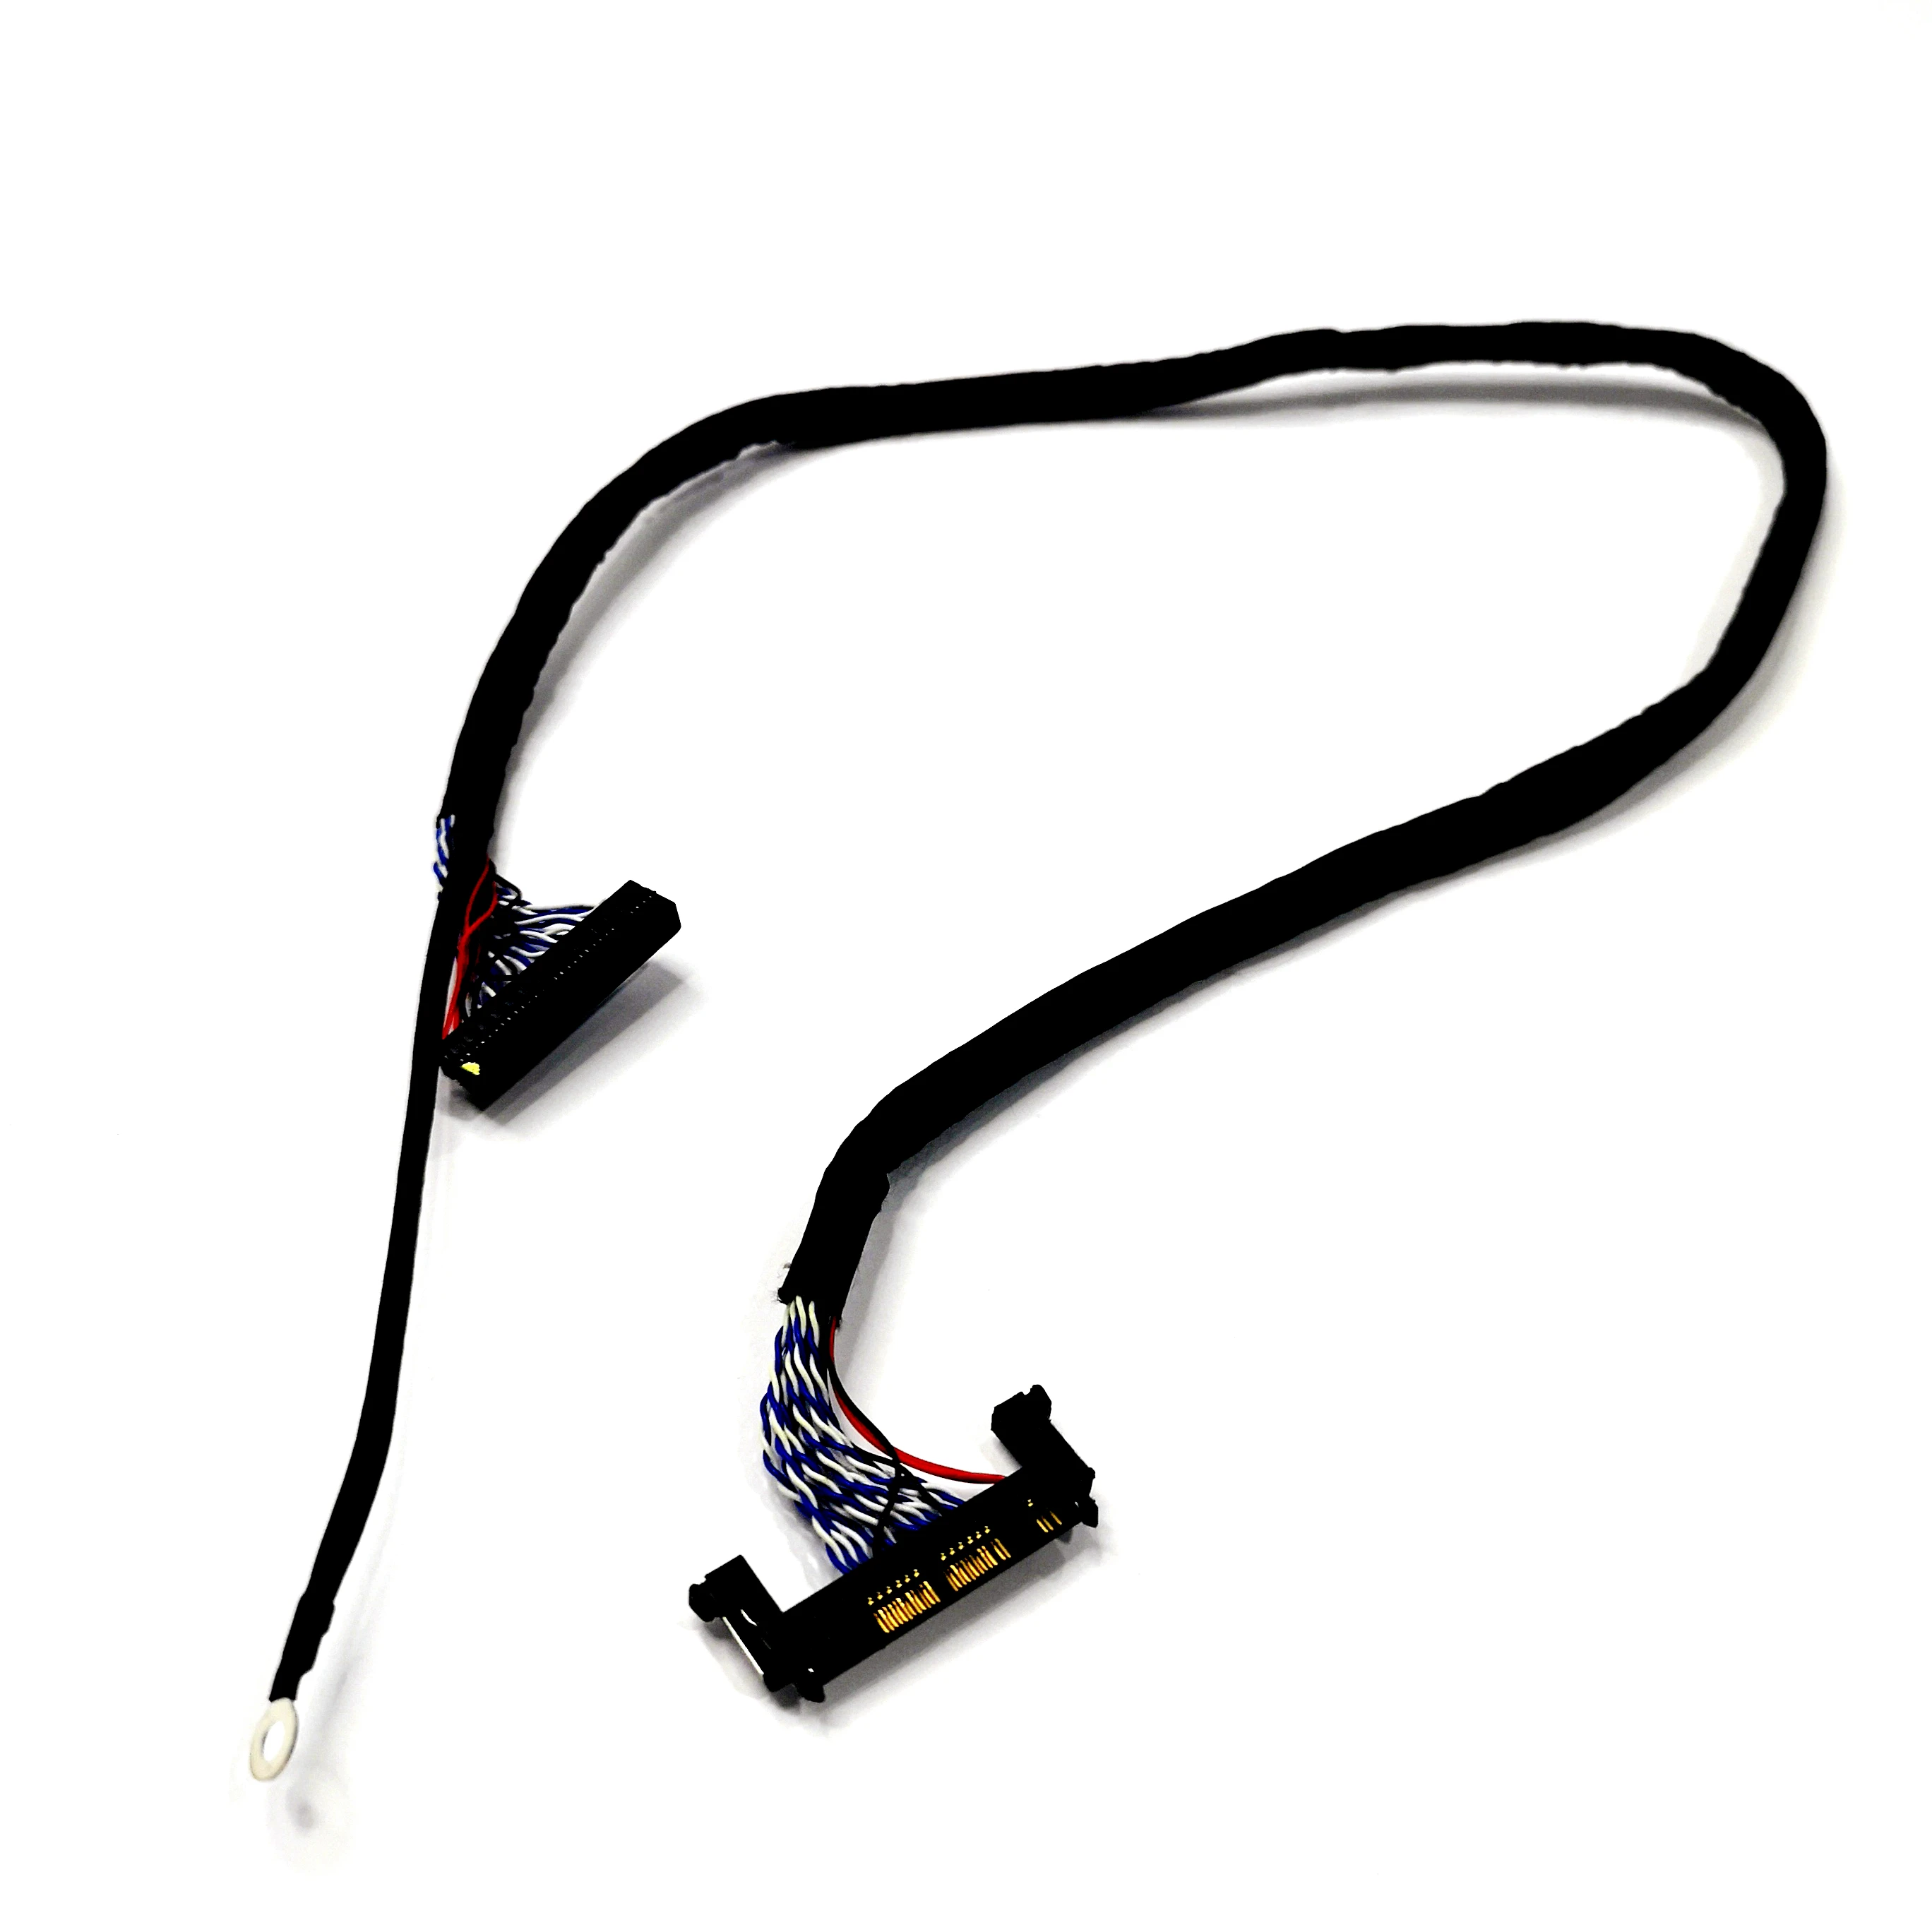 Xaja Universal Lvds Cable 51 Pin 30pin for Samsung LG 26''-55